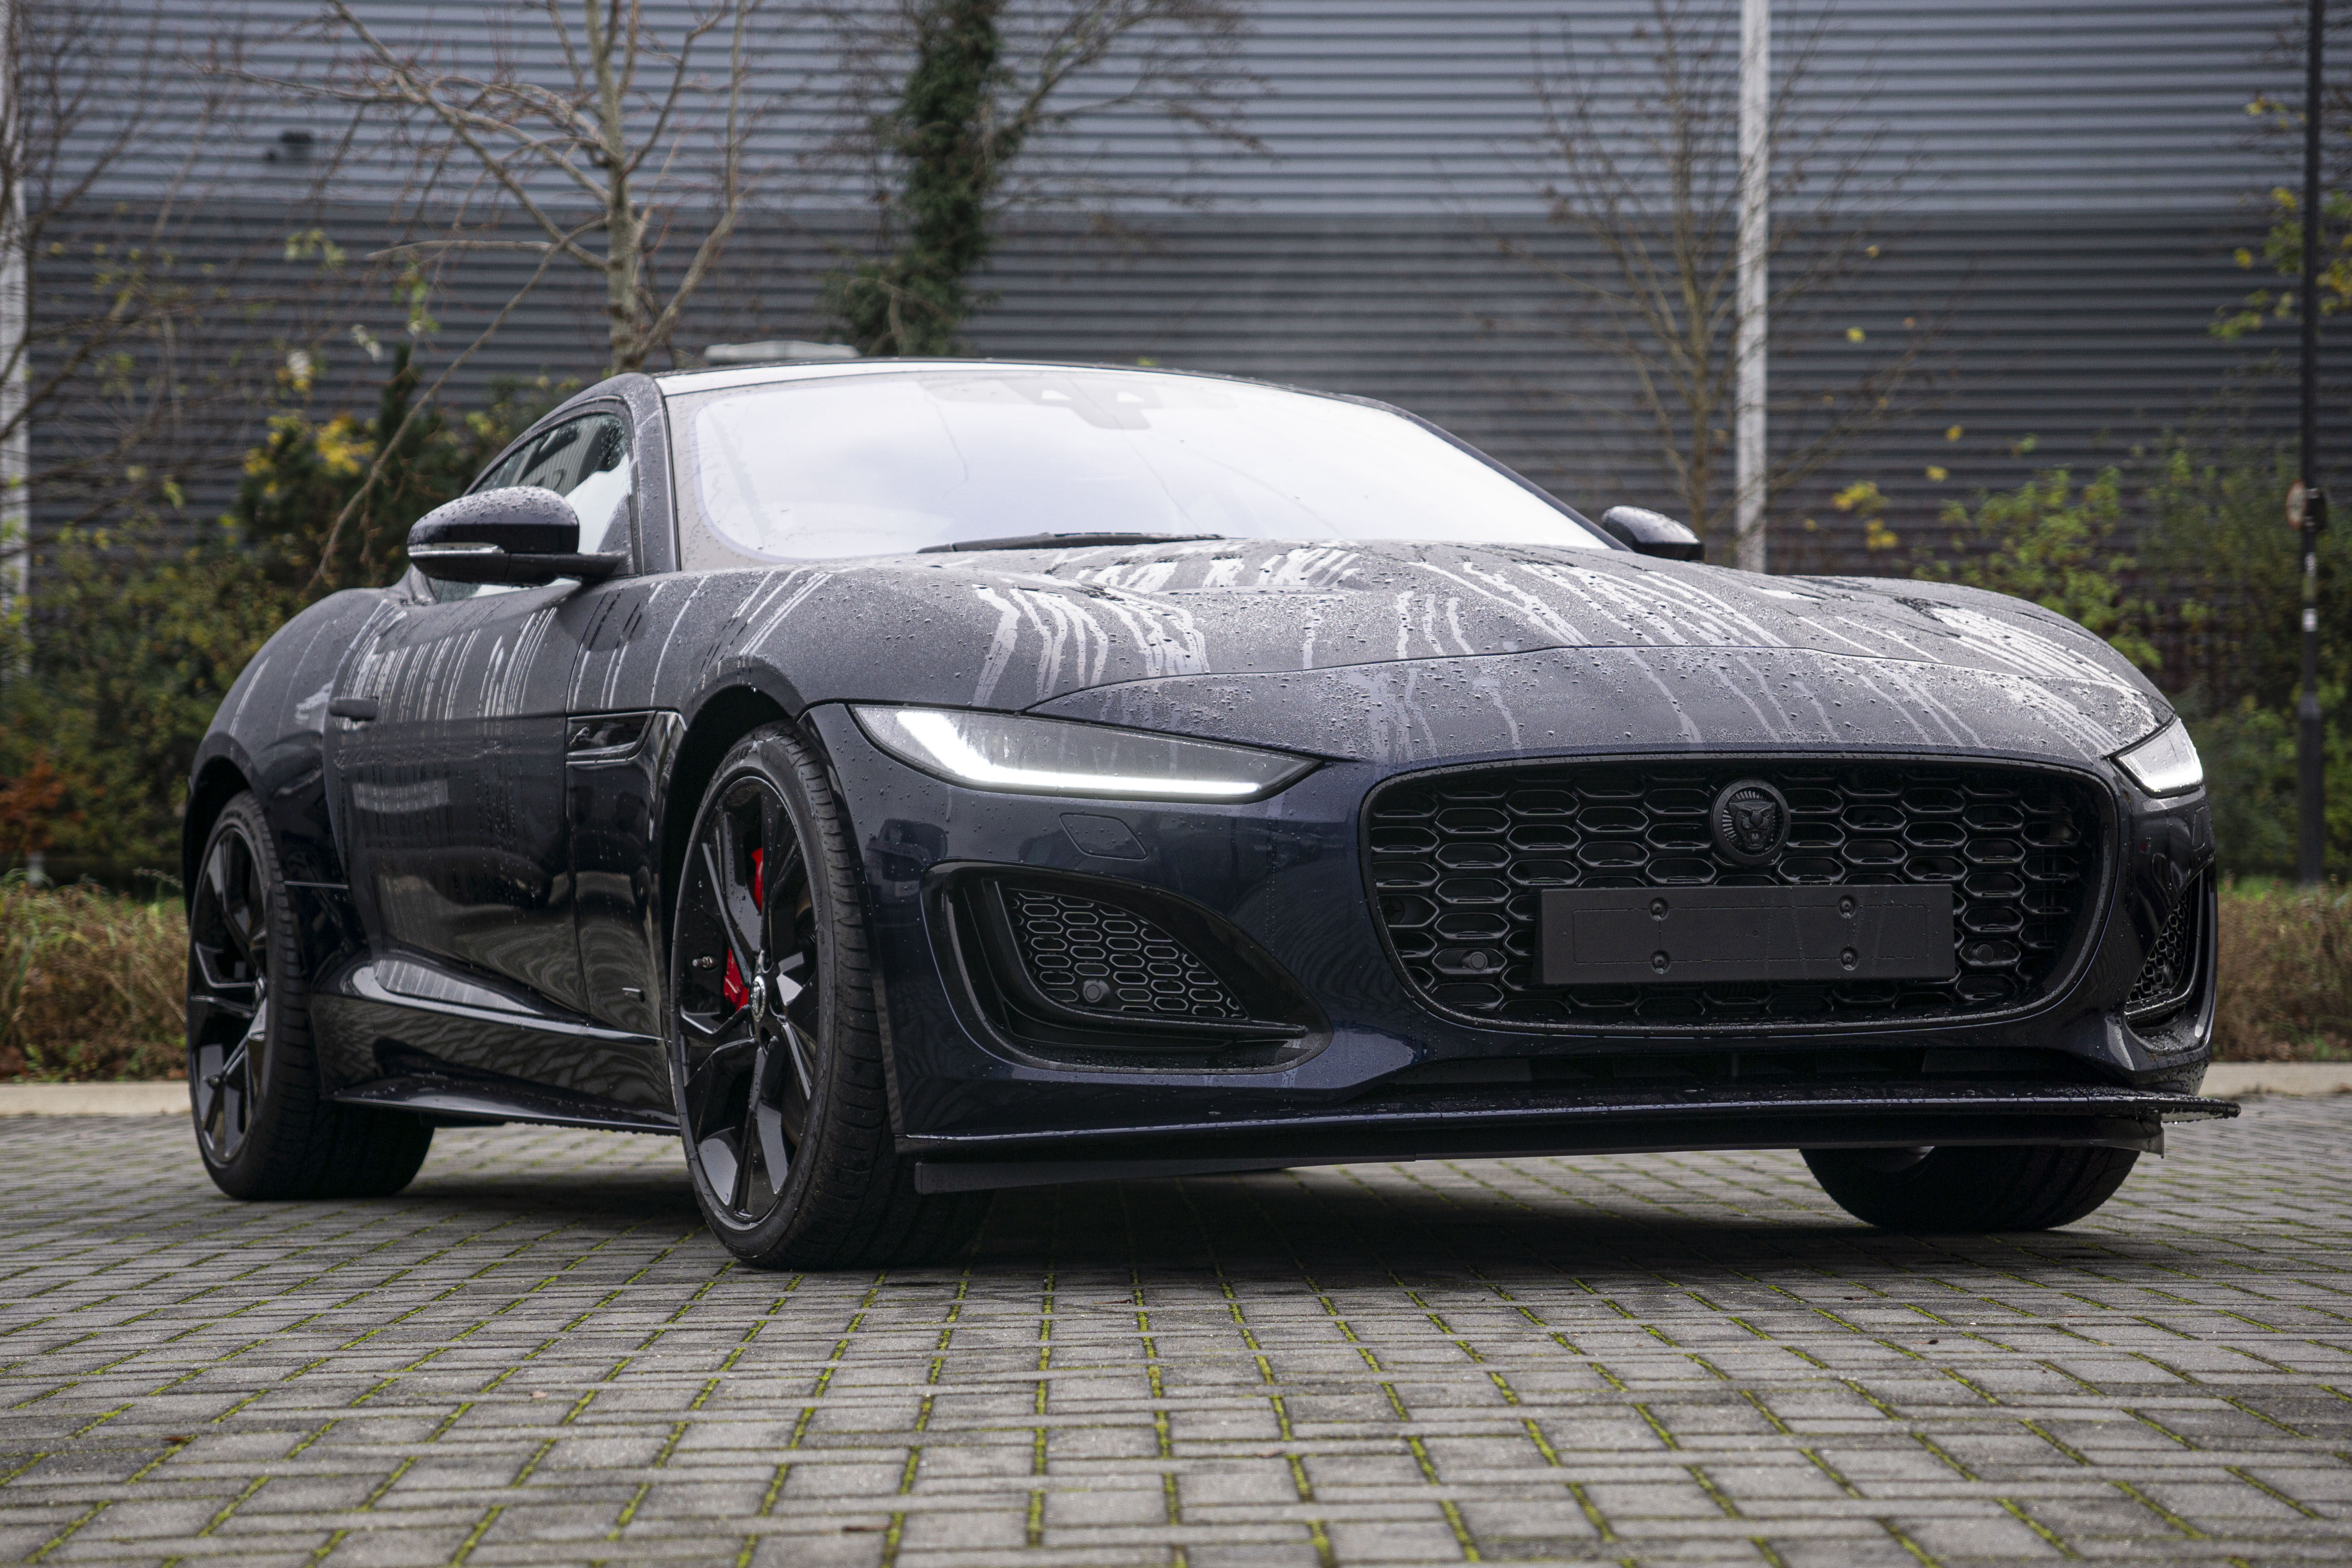 F-TYPE 5.0 P450 SUPERCHARGED V8 75 2DR AUTO COUPE